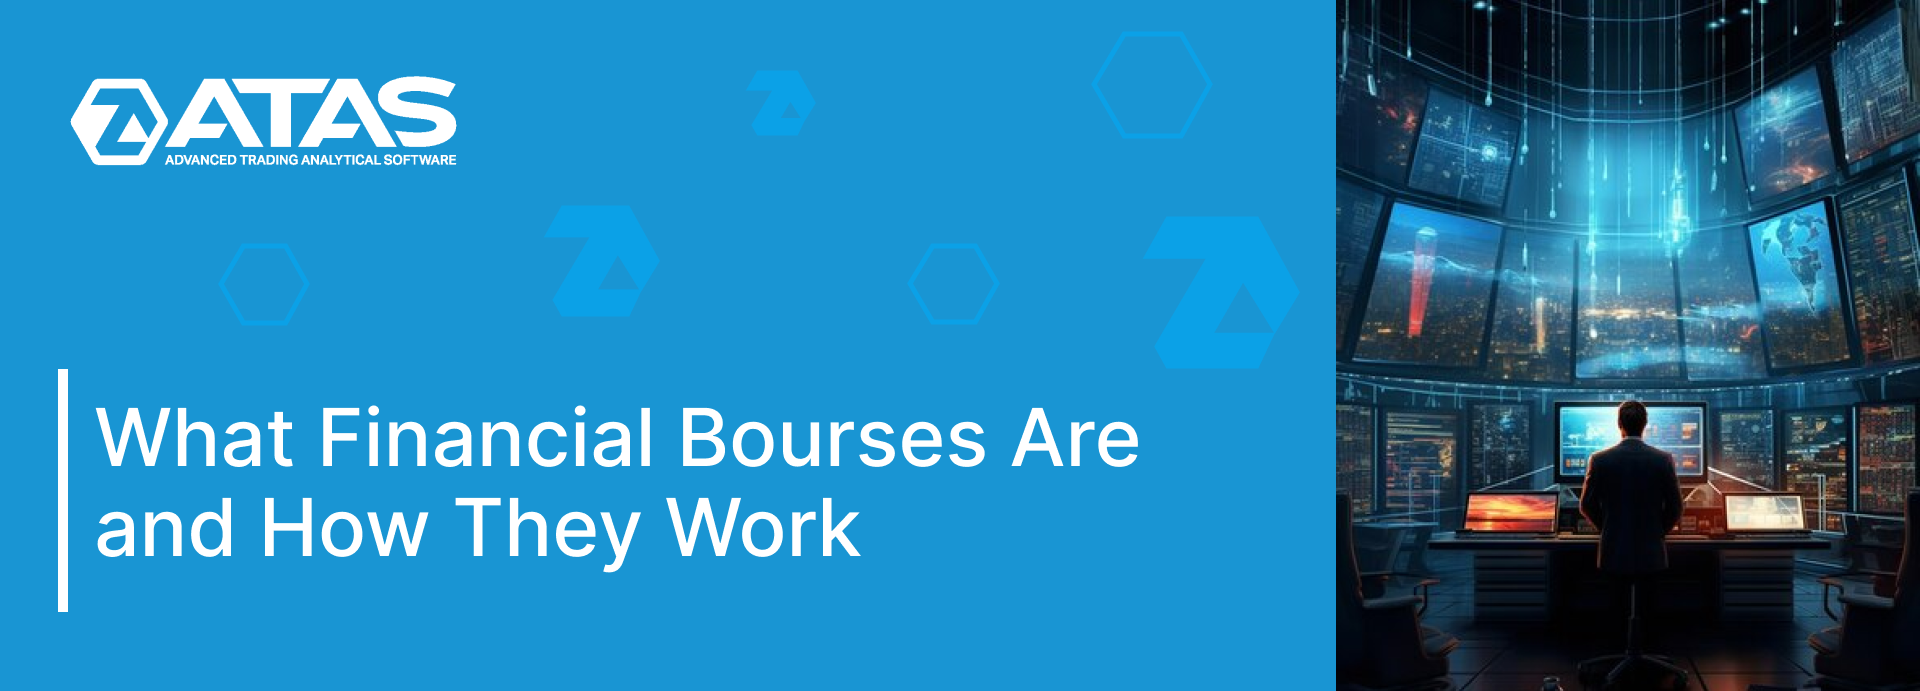 What Financial Bourses Are and How They Work